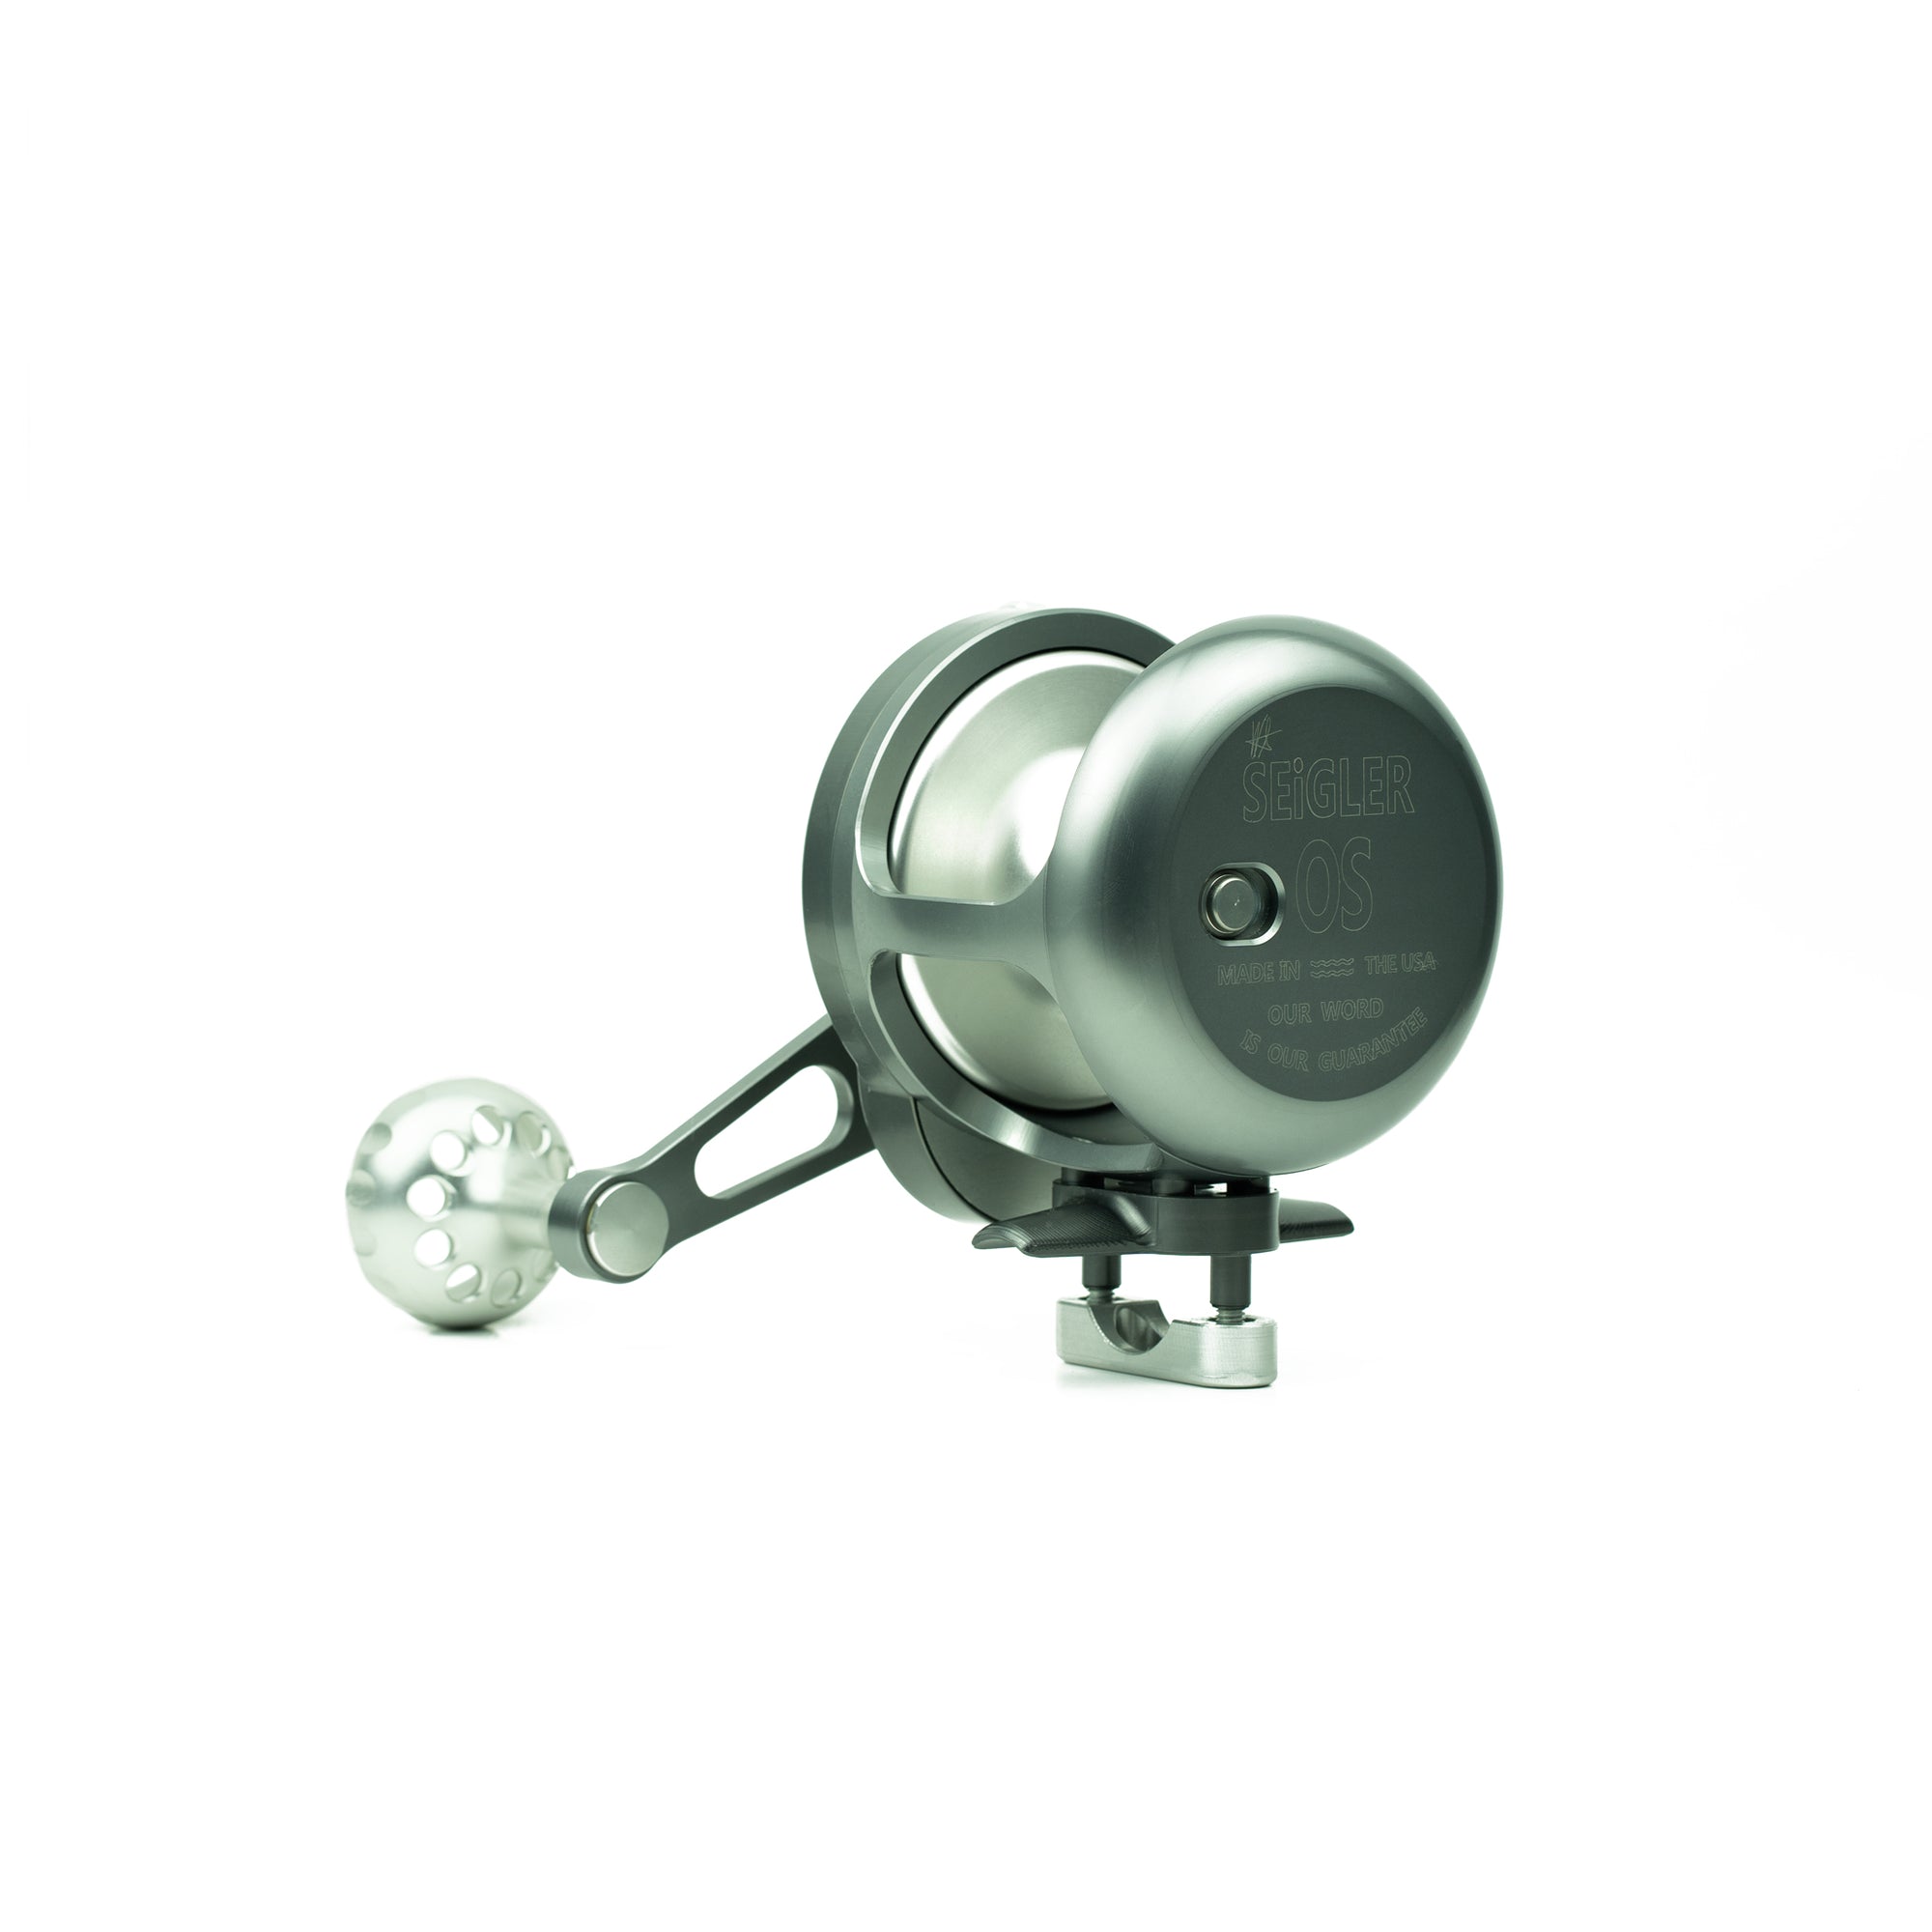 Seigler offshore small fishing reel with silver accents. 